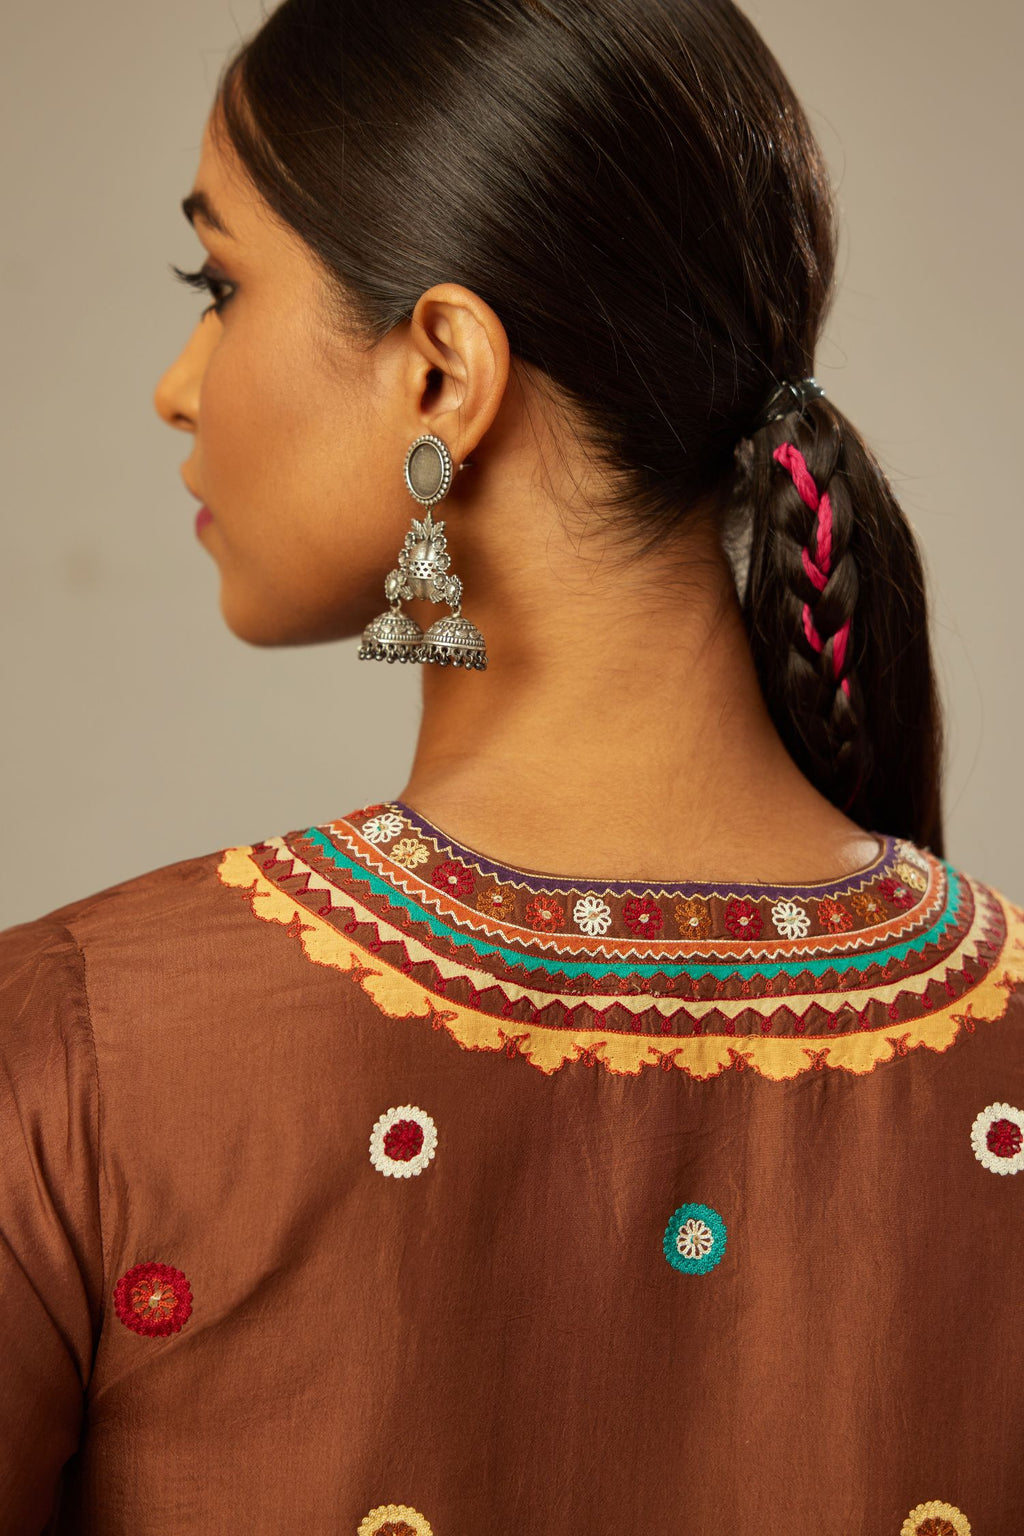 Brown silk short V-neck kurta set, with straight hem and side pockets, decorated with fine appliqué and aari thread embroidery.